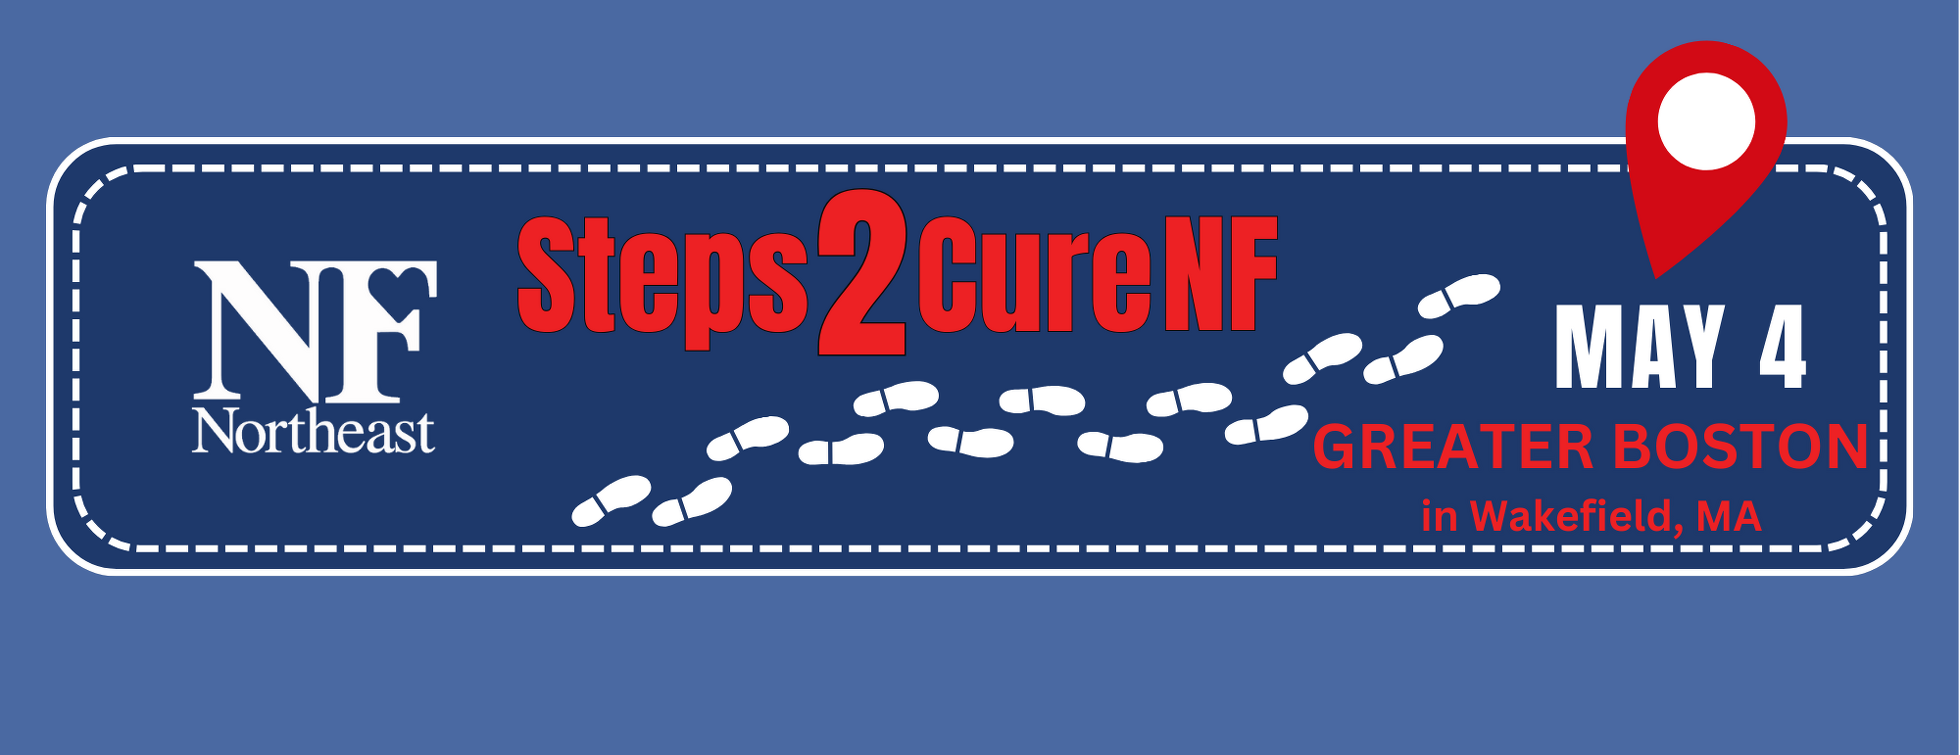 Steps2Cure NF - Greater Boston